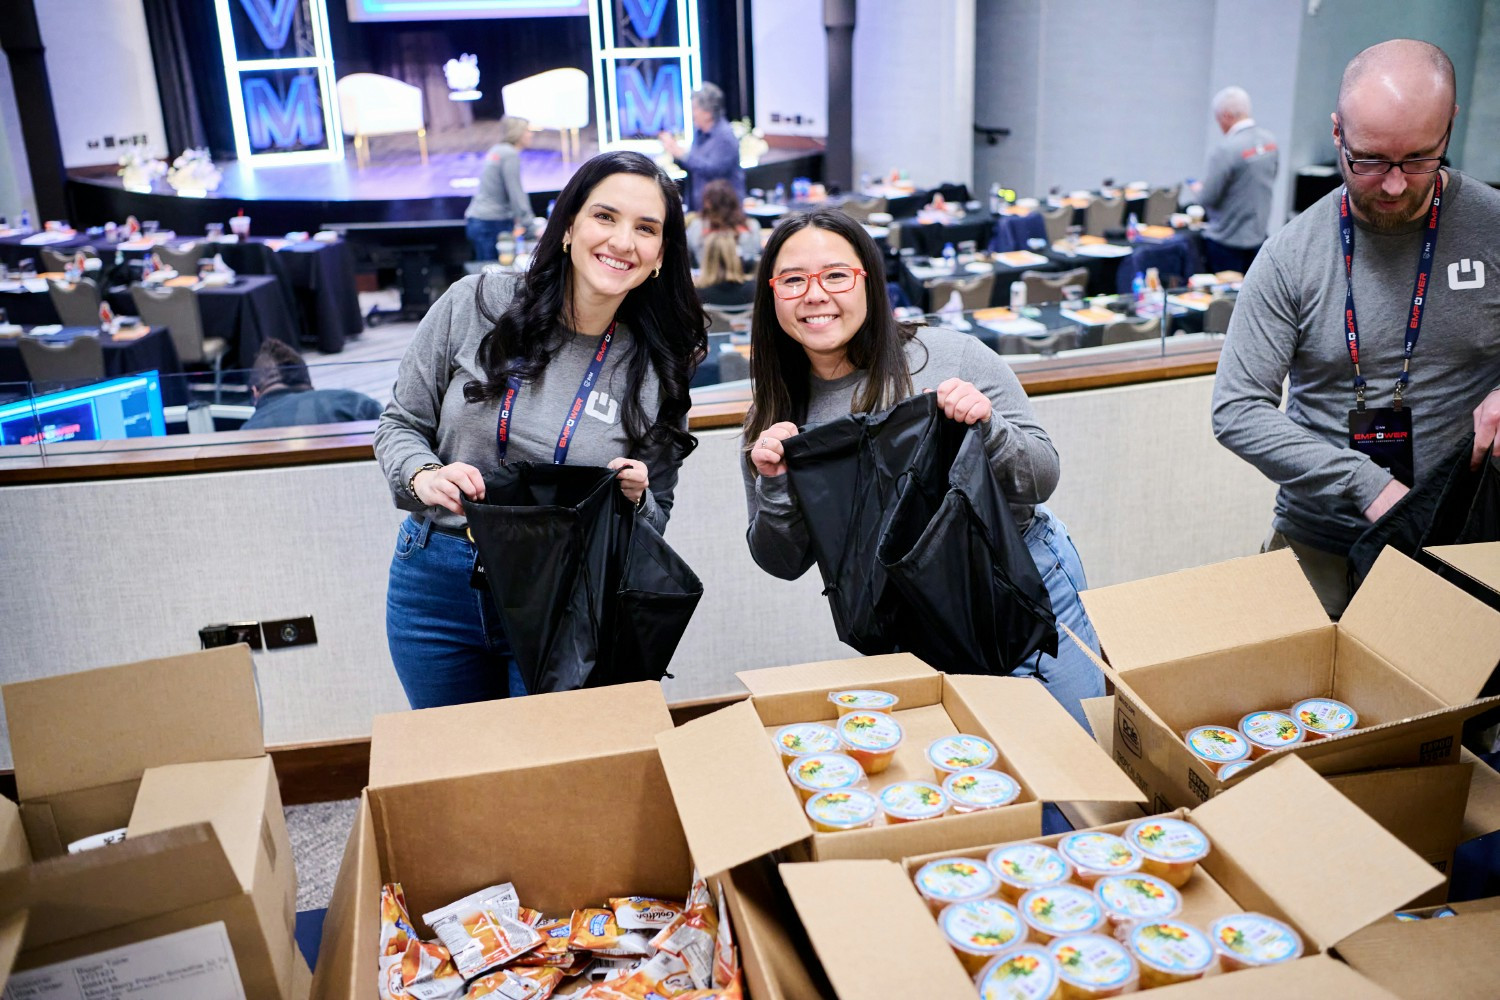 JVM Team packing food to donate to children's charity.